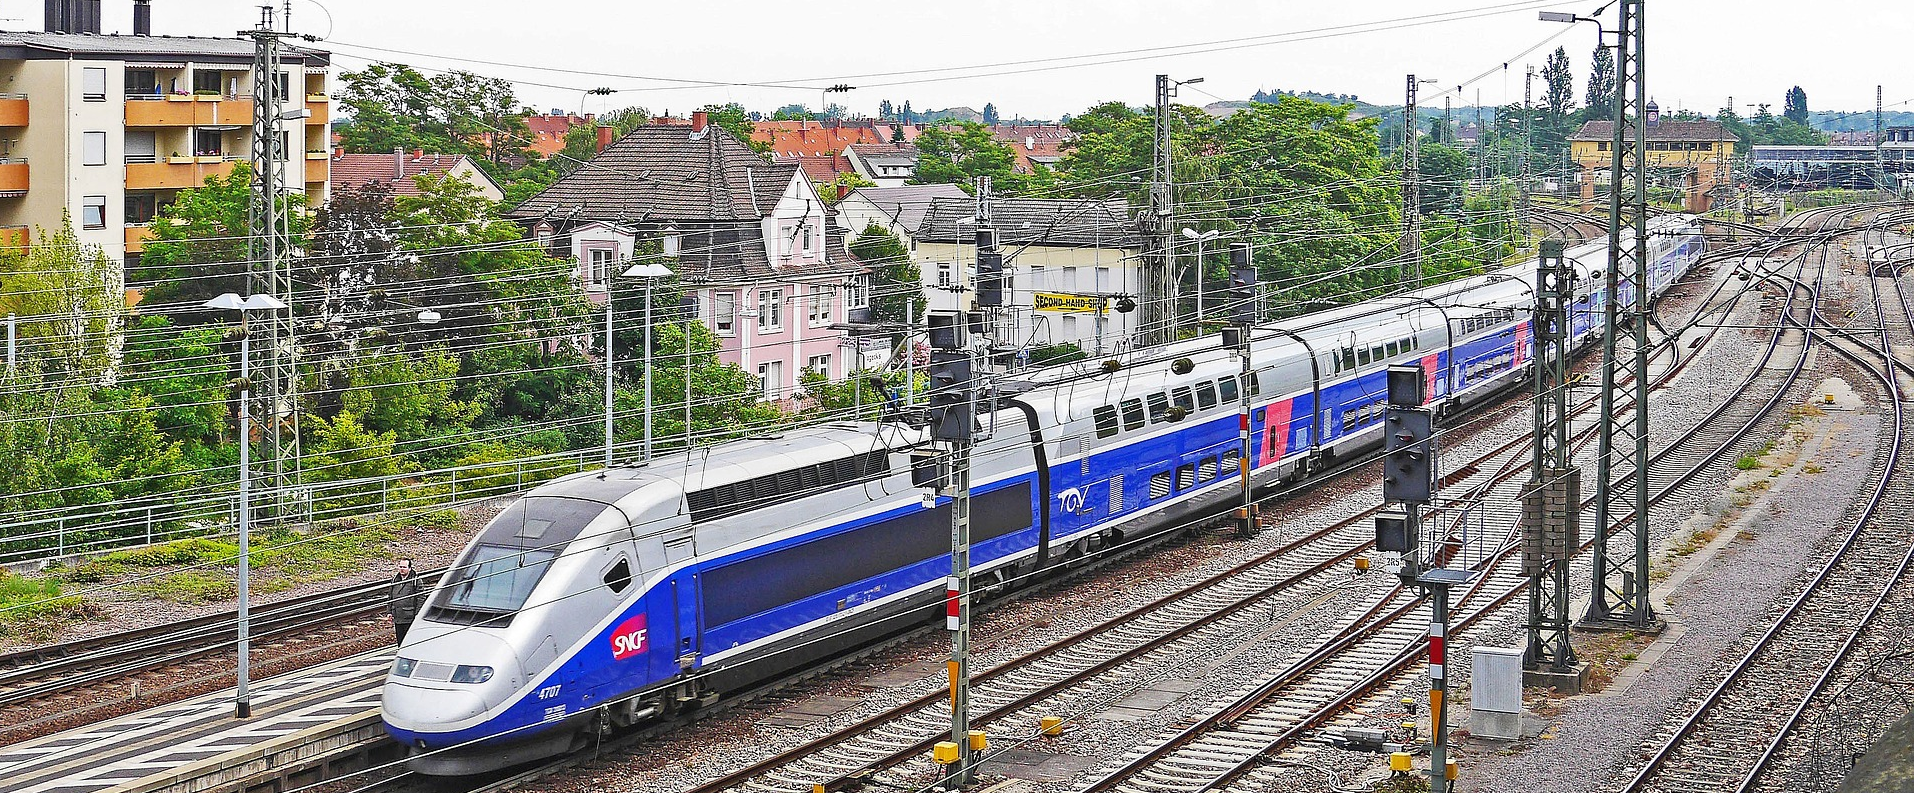 Anti-fraud strategy reinforce at SNCF